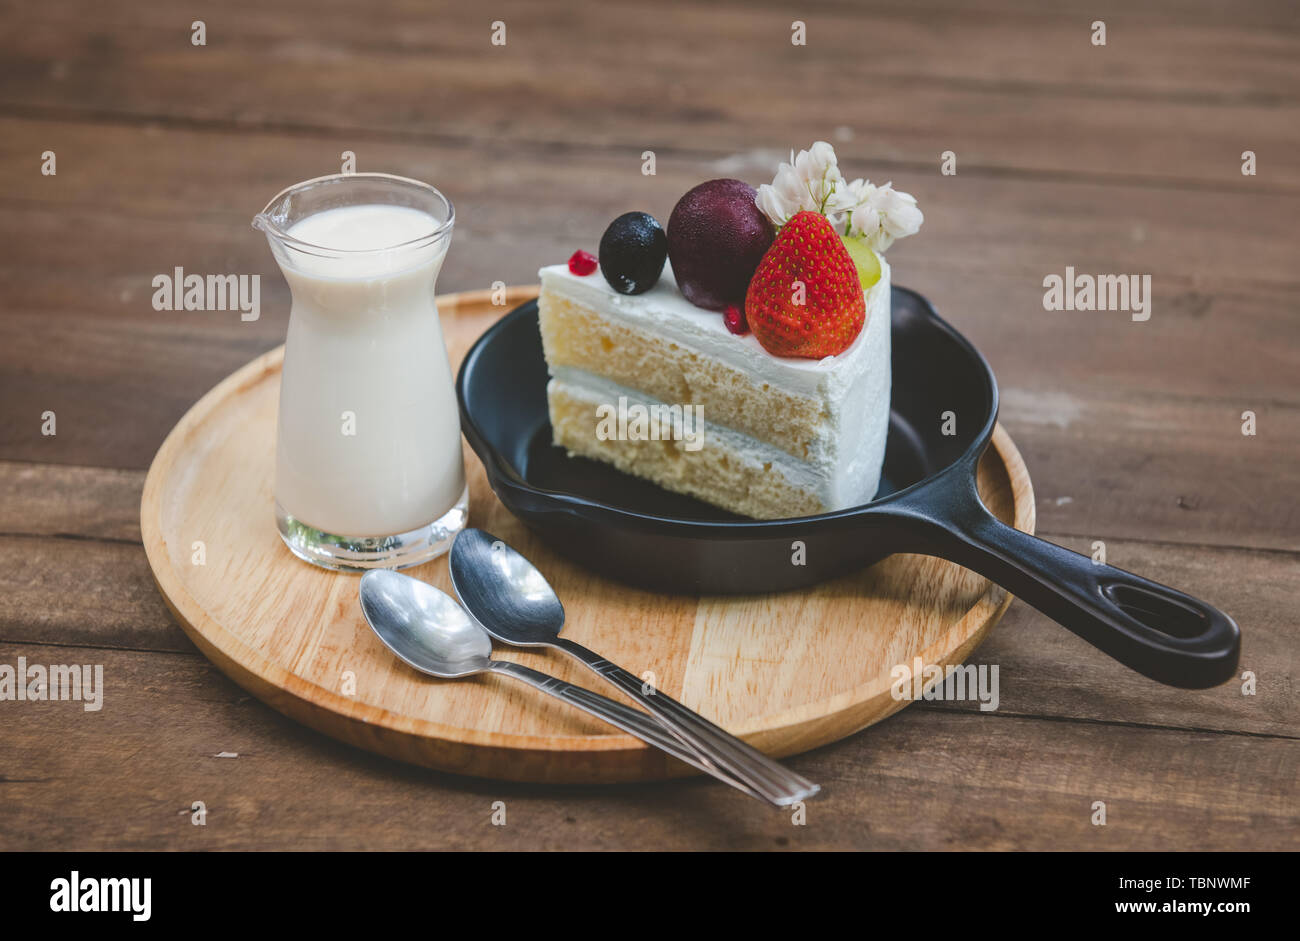 Sweet fruit cream cake cut serve with milk glass set on wooden plate with indoor low lighting. Stock Photo